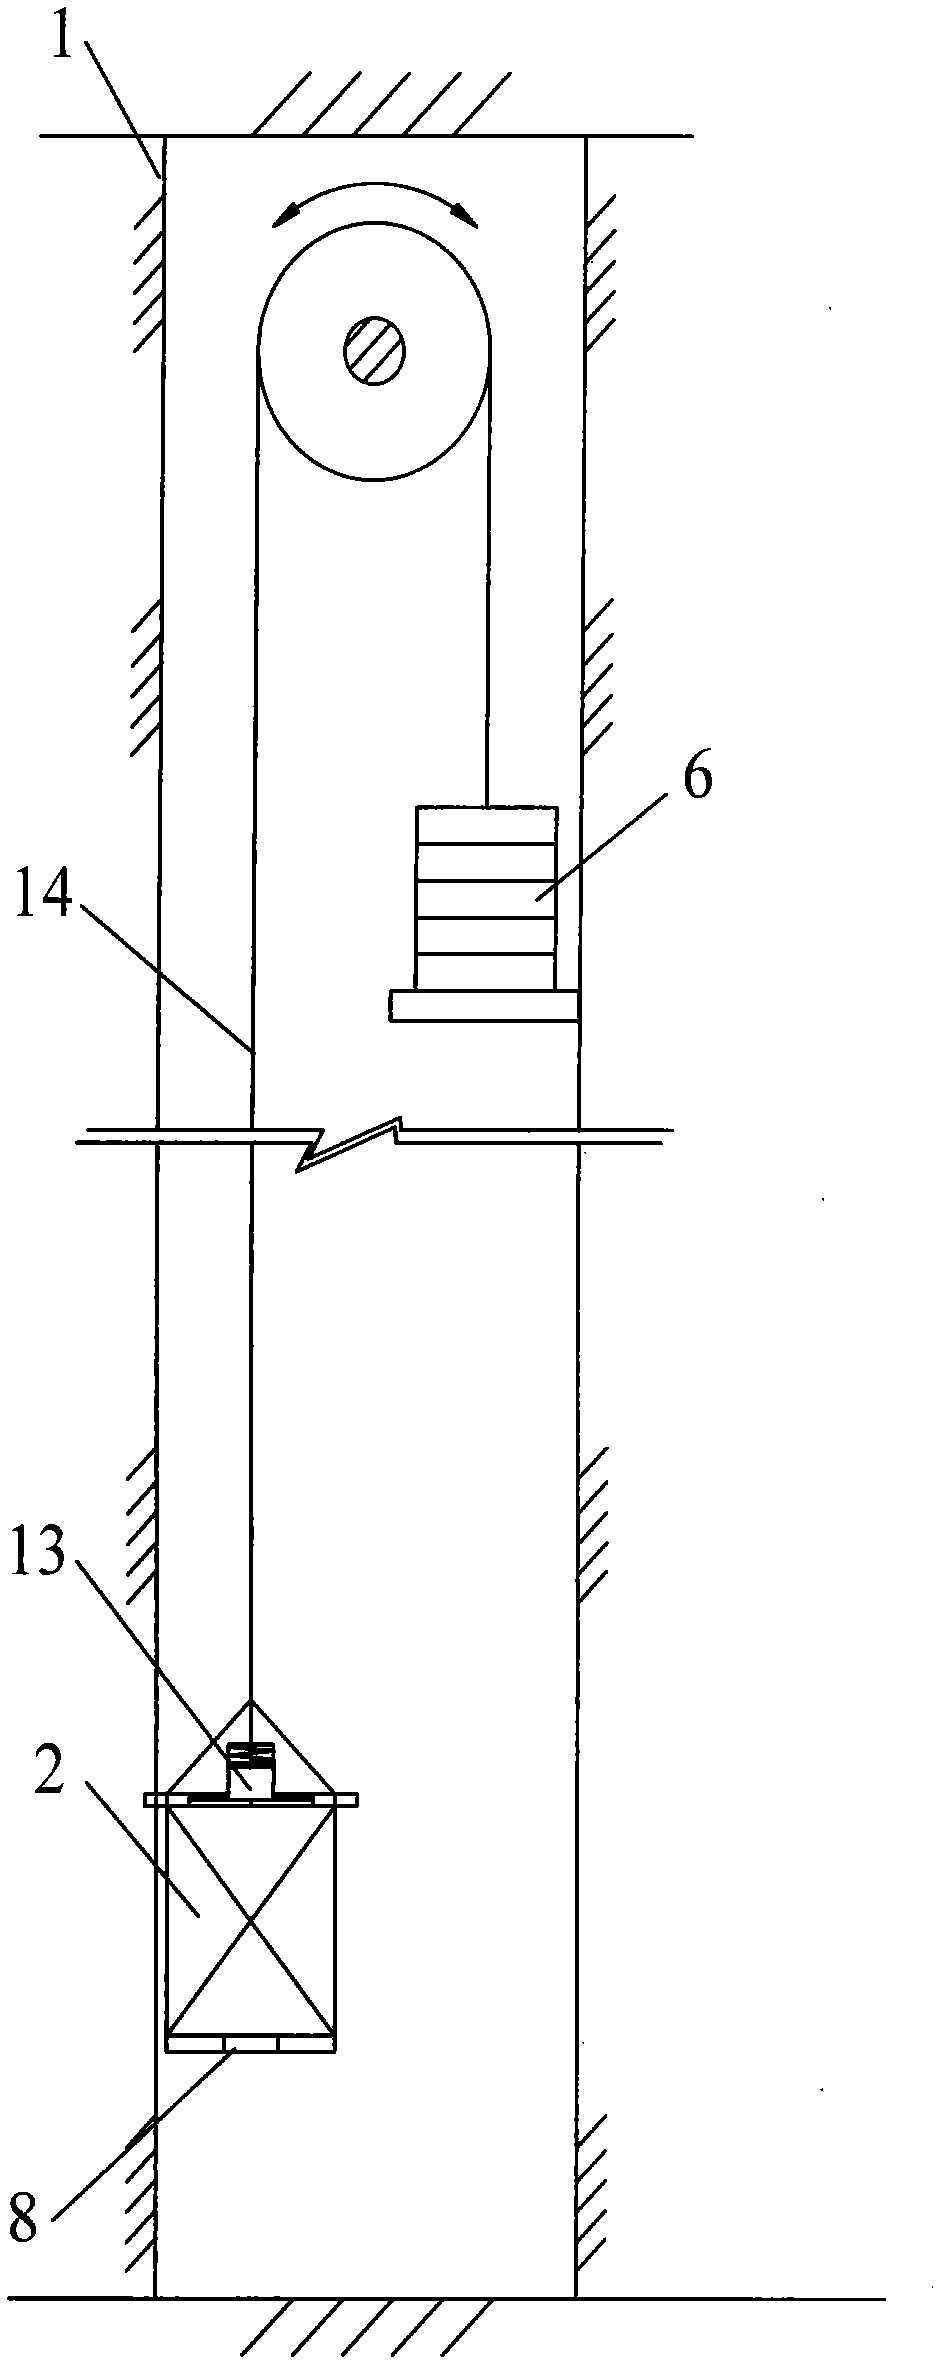 Variable counterweight elevator and variable counterweight hydraulic elevator